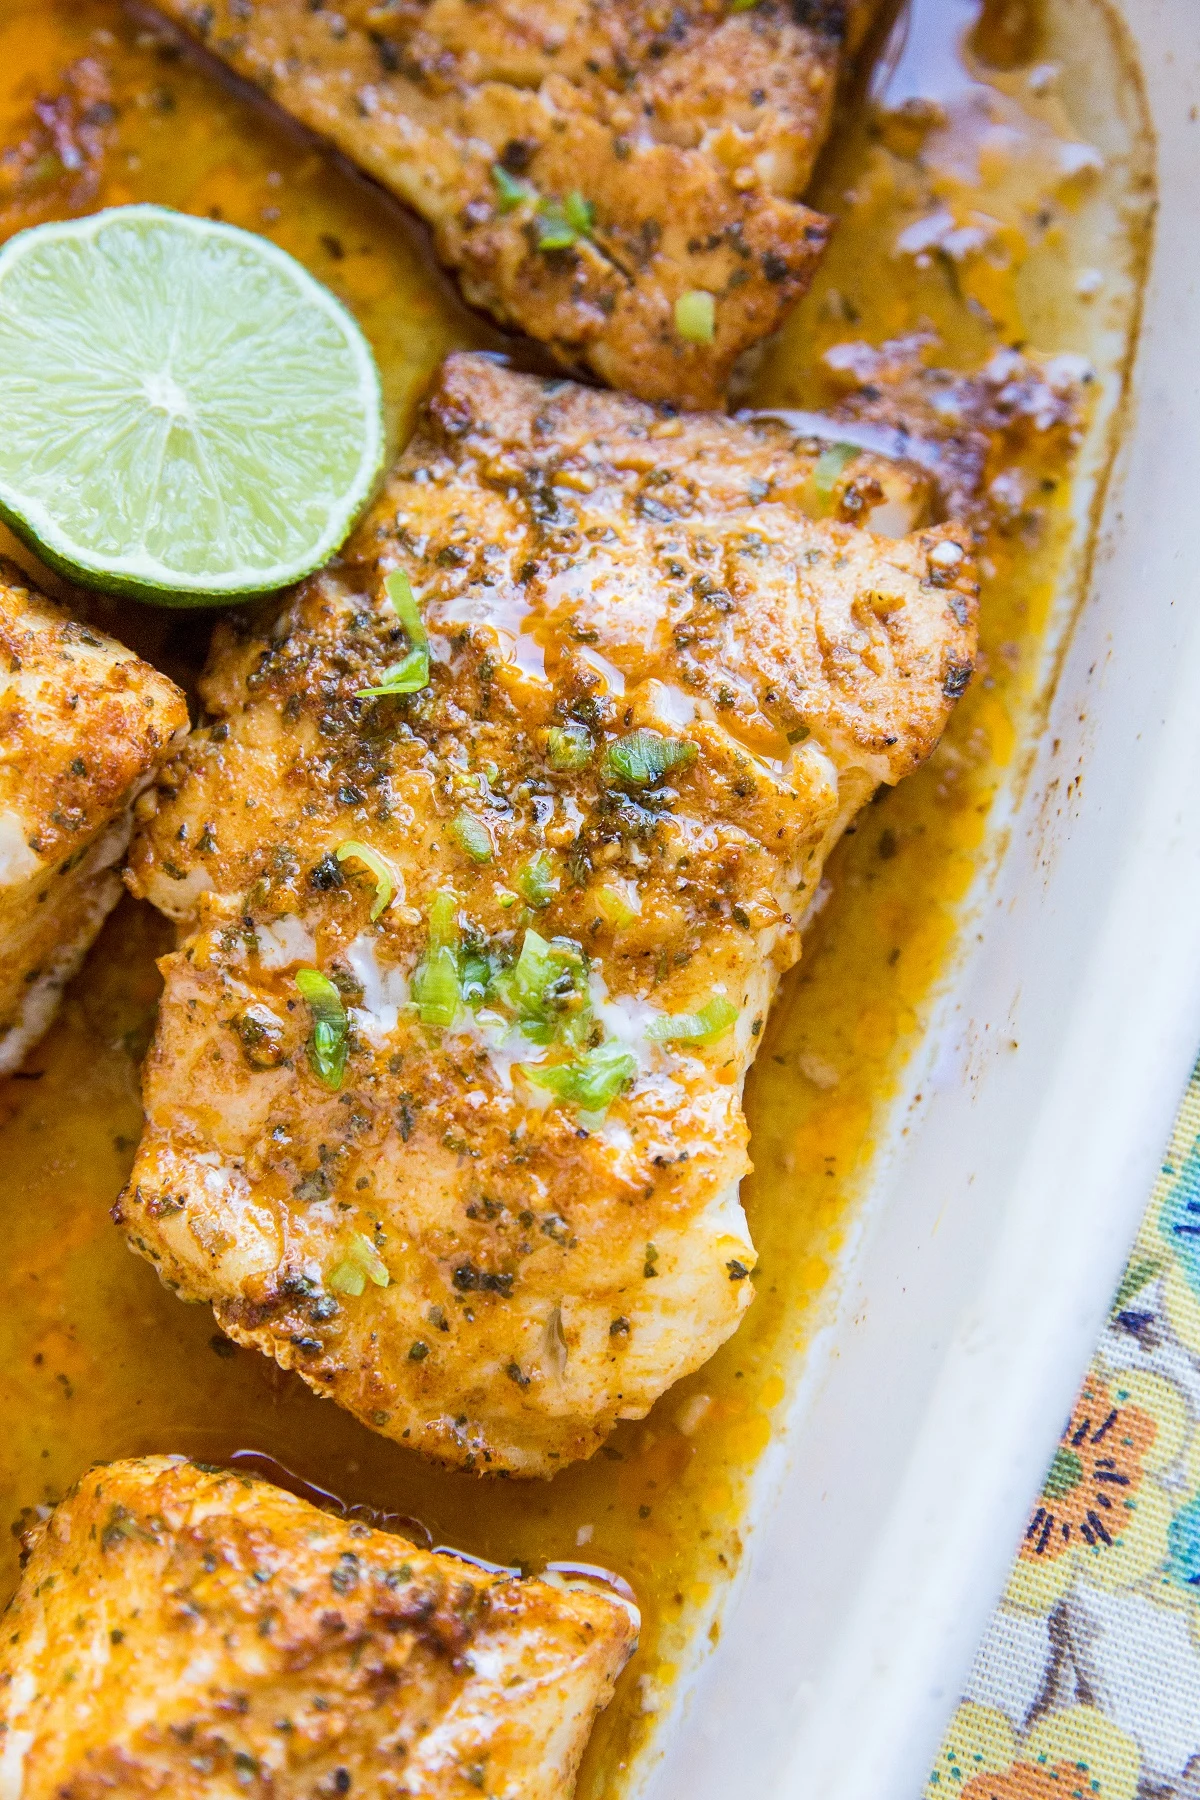 Chili Lime Baked Cod - an easy baked cod recipe in a garlic chili lime marinade. Few ingredients required for this healthy paleo, whole30, keto dinner recipe!